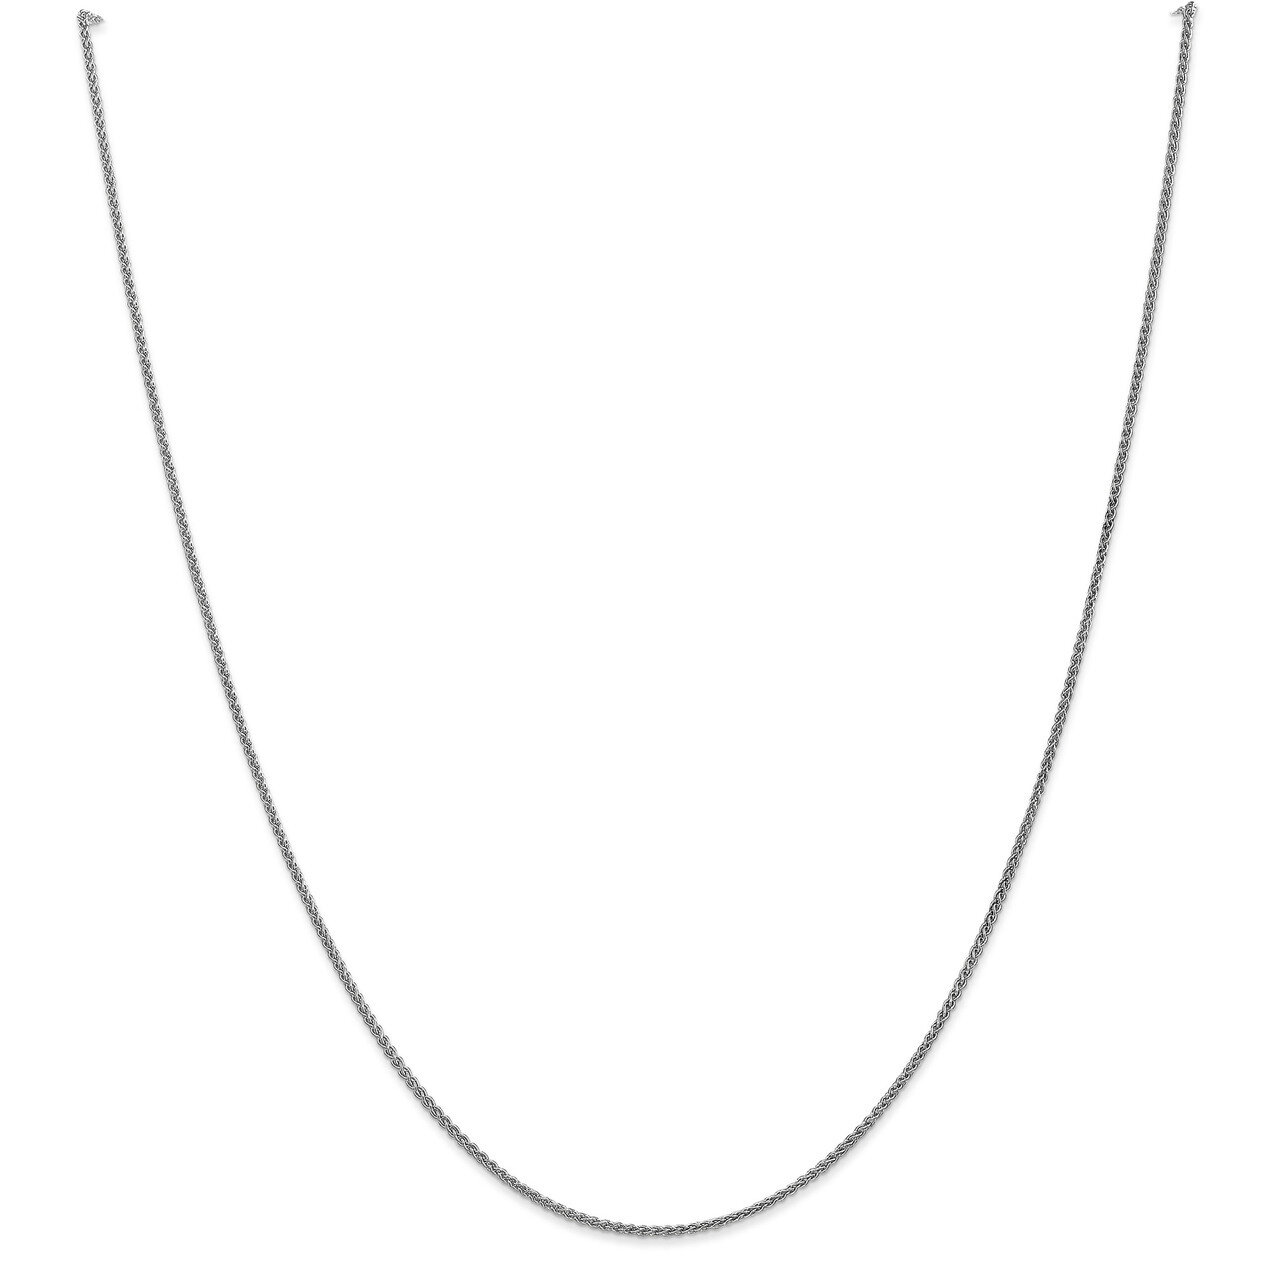 16 Inch 1.25mm Solid Polished Spiga Chain 10k White Gold 10WSP030-16